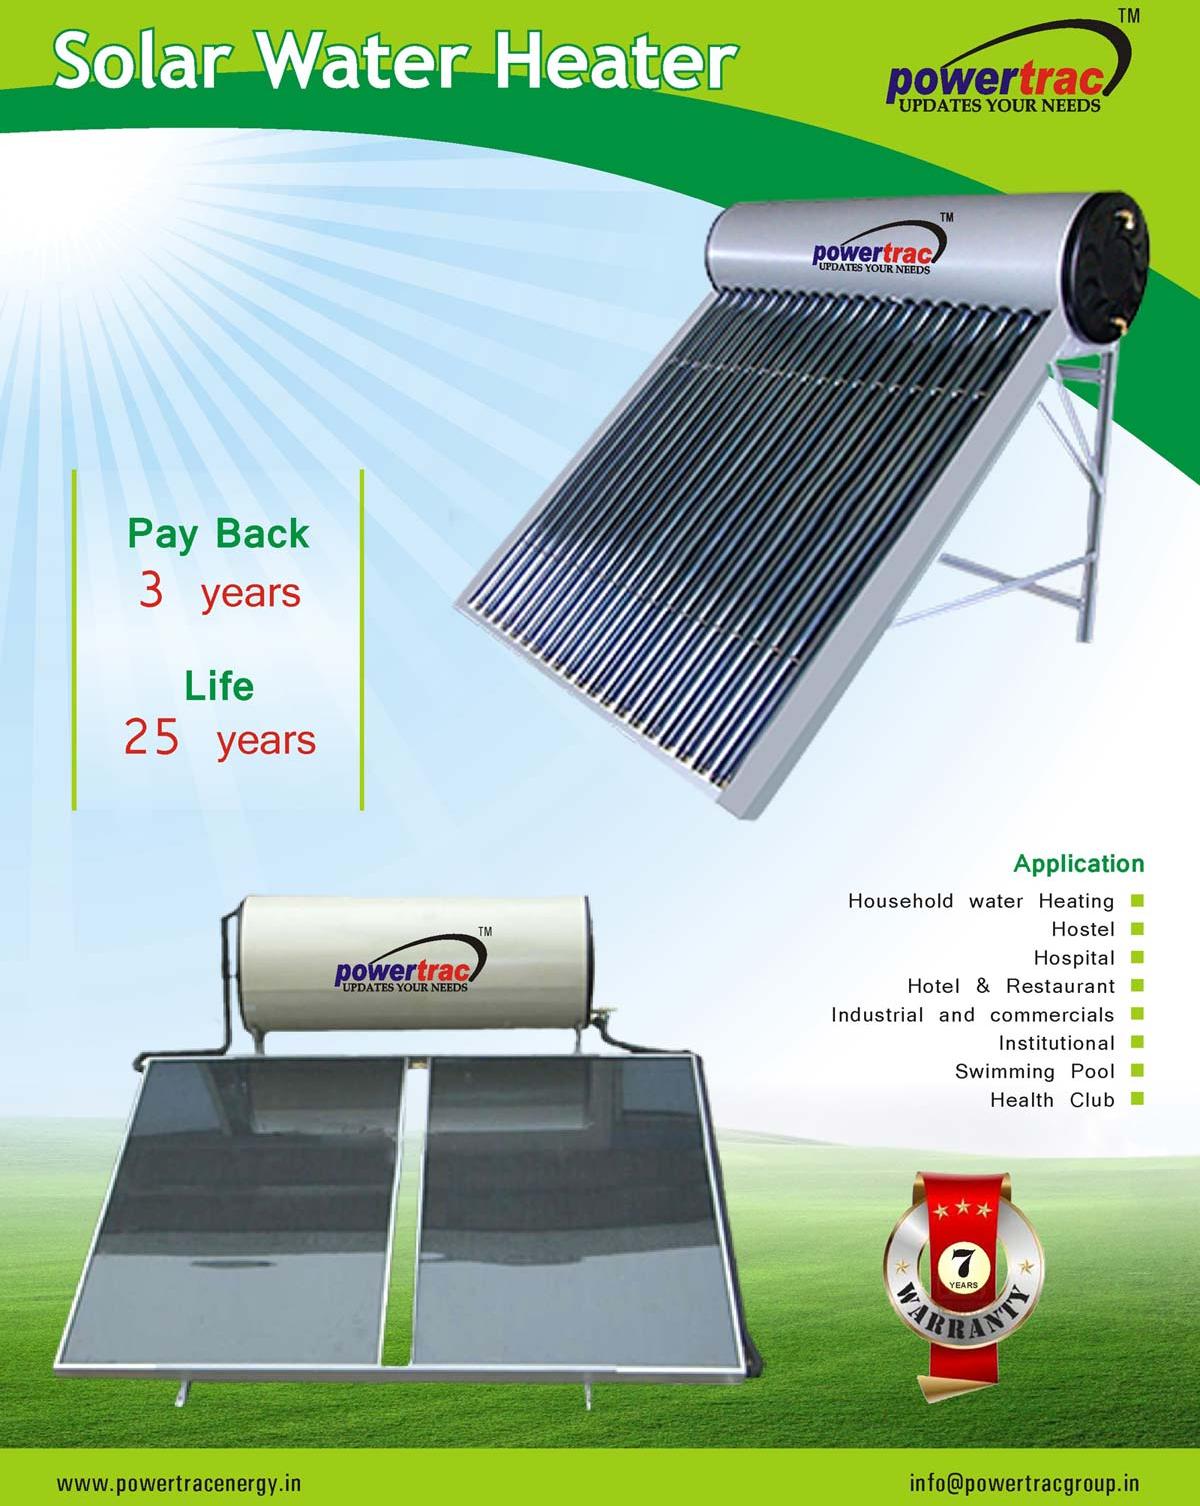 Green Powertrac Round Automatic Solar Water Heater, for Commercial, Home, Certification : CE Certified